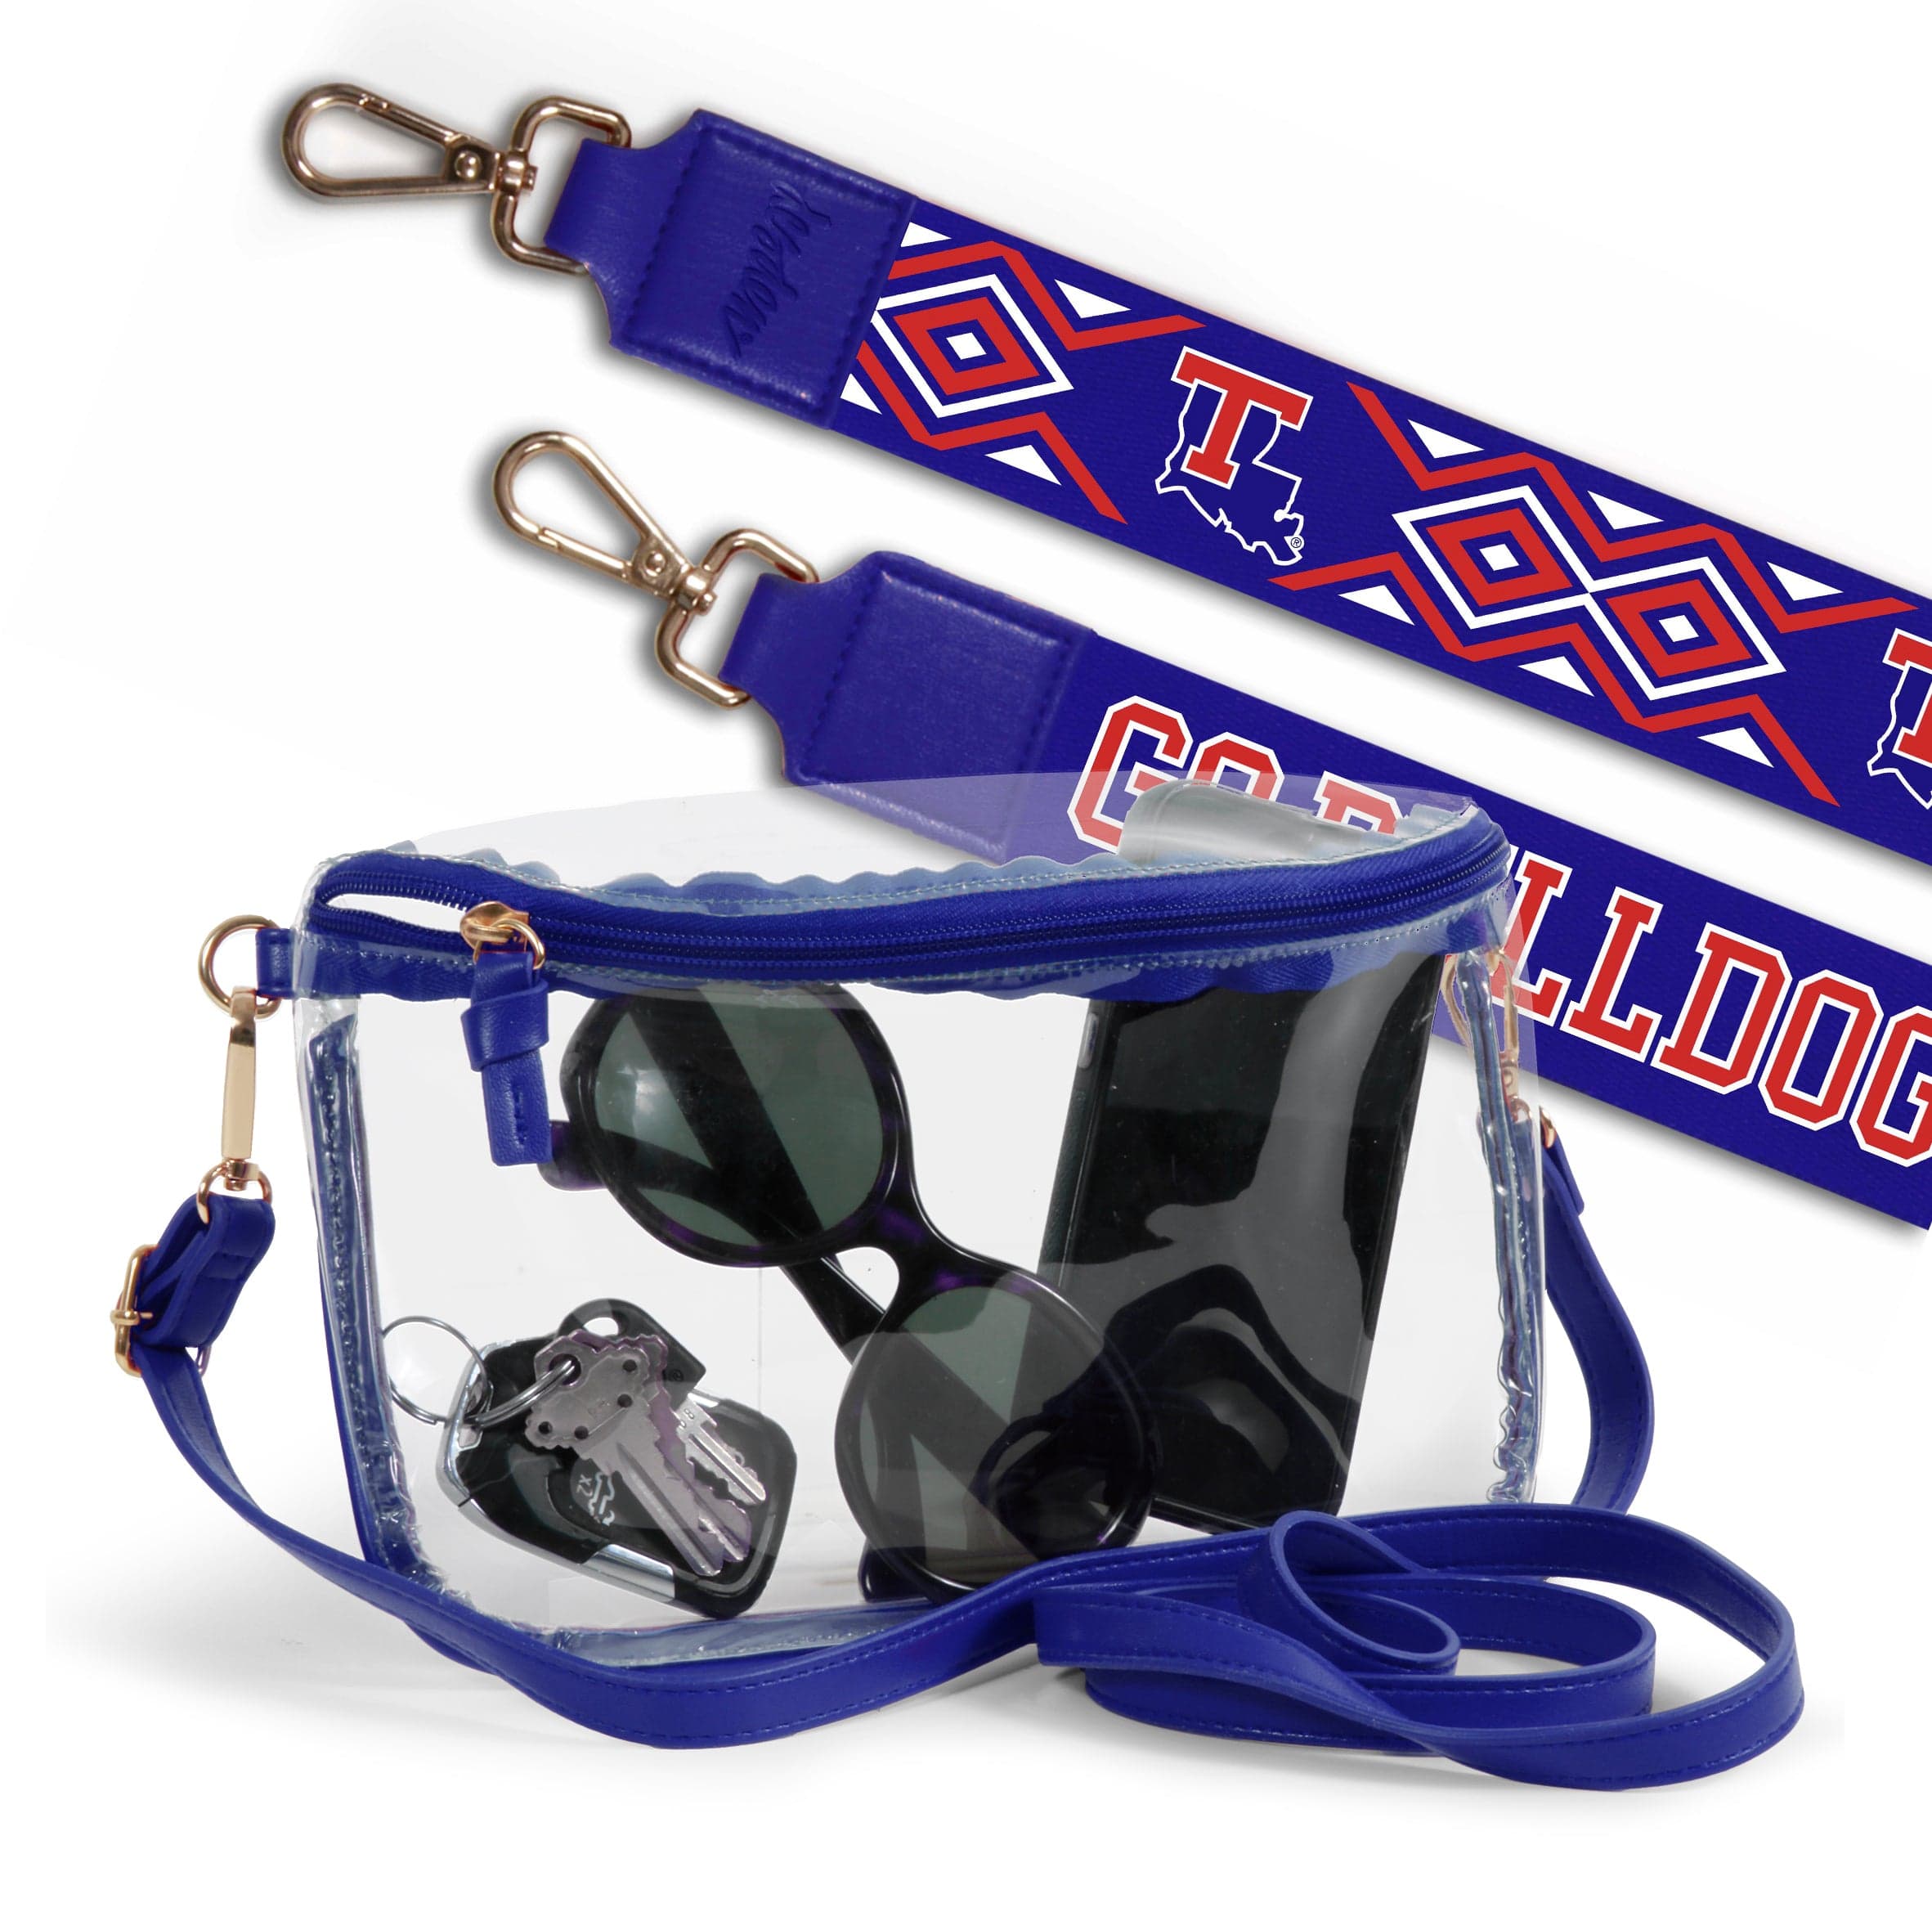 Lexi Clear Purse with Patterned Shoulder Straps - Louisiana Tech